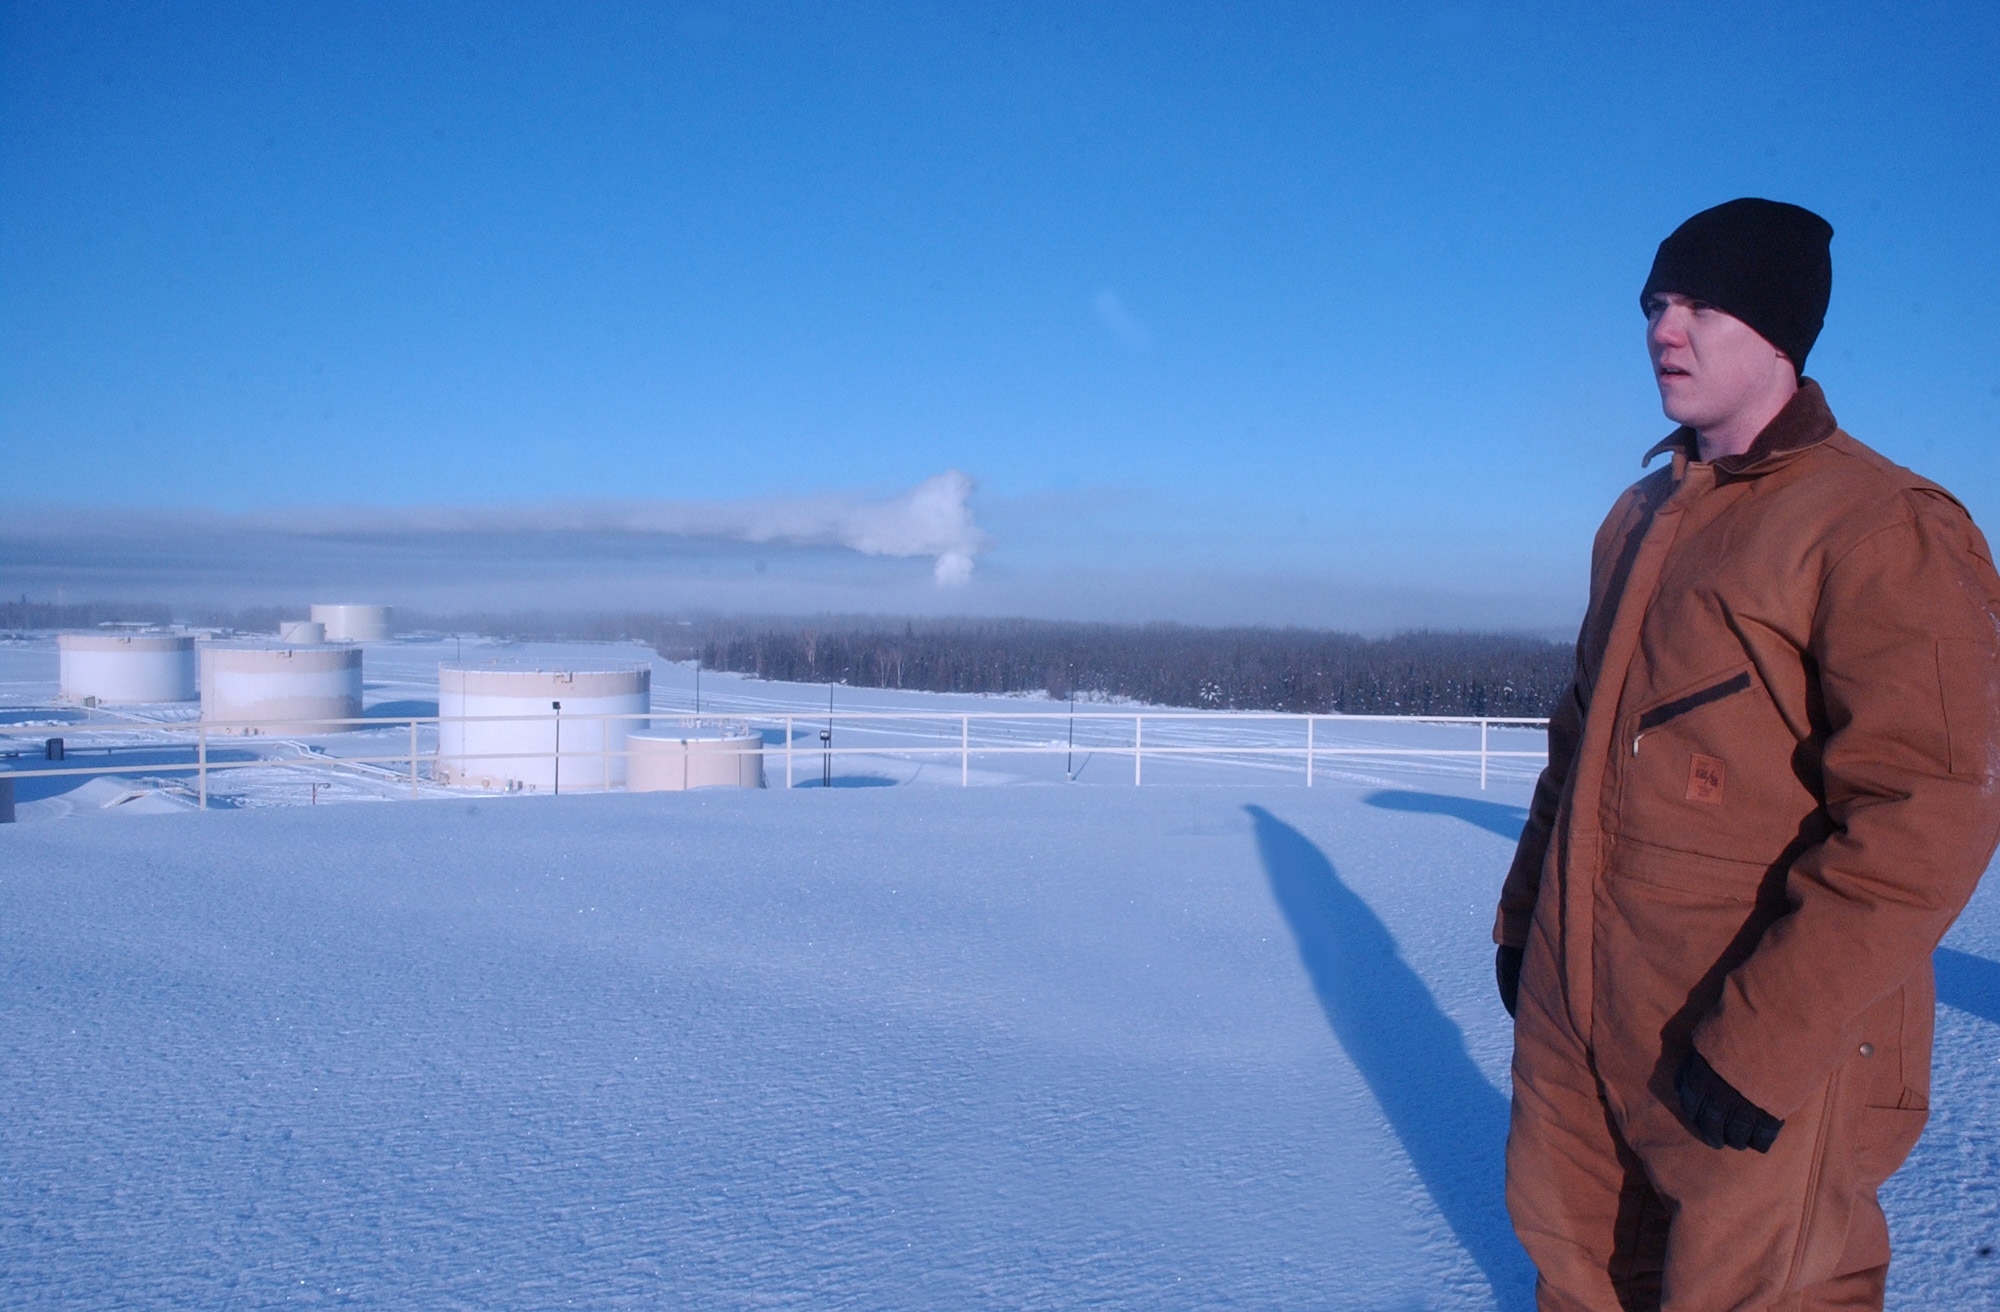 EIELSON AIR FORCE, Alaska -- Staff Sgt. Kyle Evans, 354th Logistics Squadron, visually inspects the top of a bulk fuels storage tank. Despite 42 below zero temperatures, the fuels team braves the arctic cold in order to ensure the integrity of the bulk fuels systems. (U.S. Air Force photo by Senior Airman Justin Weaver)